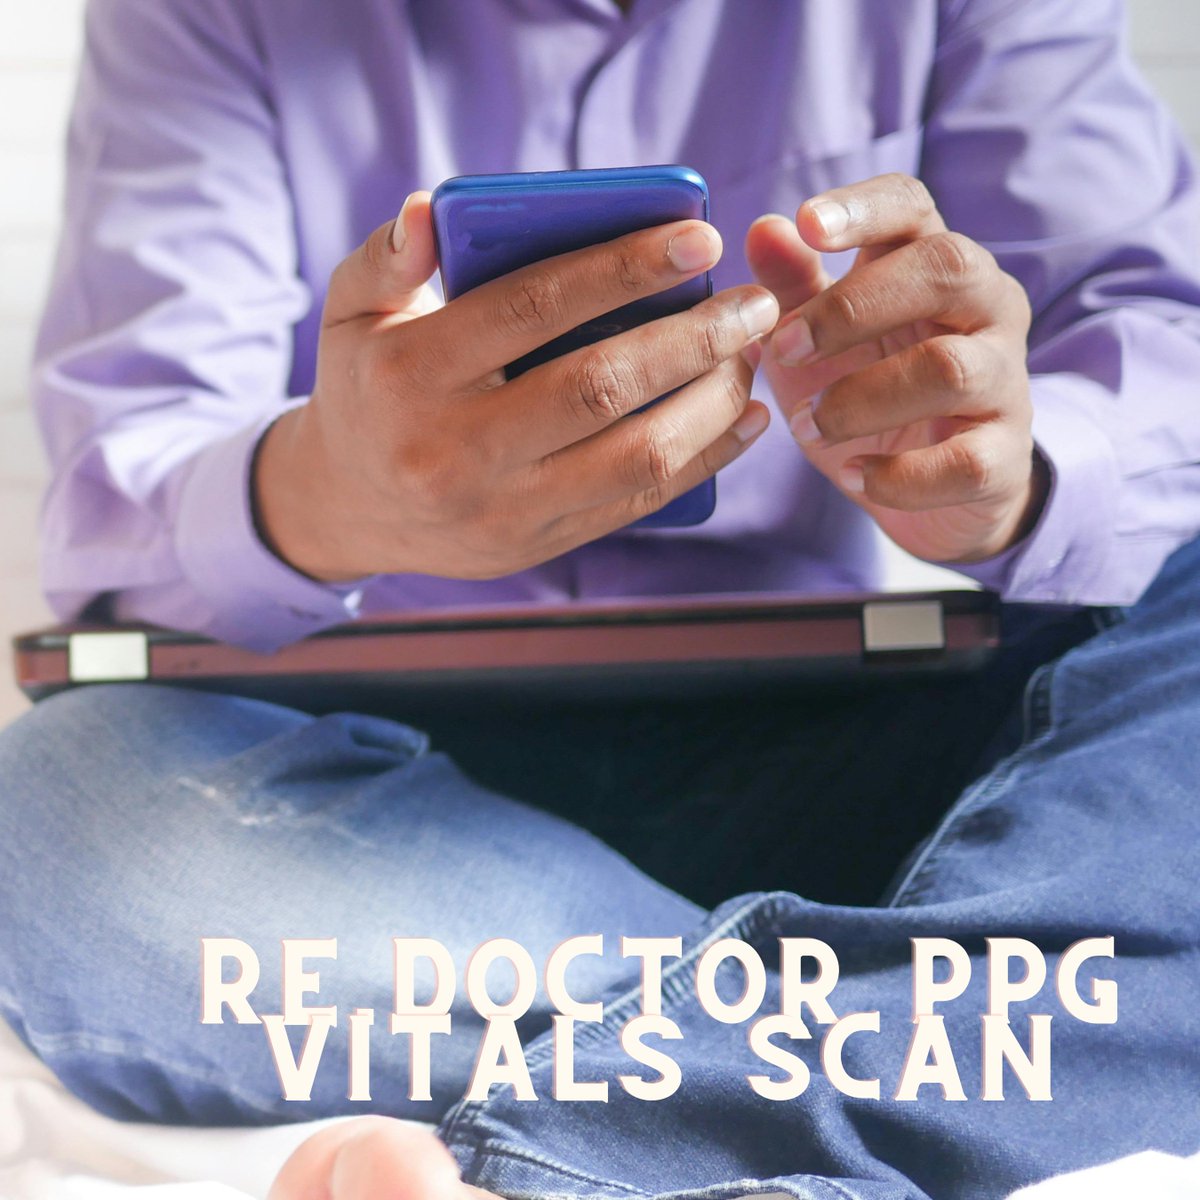 How Can RE.DOCTOR PPG Vitals Scan Help with Prediabetes Management?  Learn more at re.doctor/en/prediabetes…
#vitals #diabetes #remotepatientmonitoring #wellness #healthscreening #vitalsigns #prediabetes